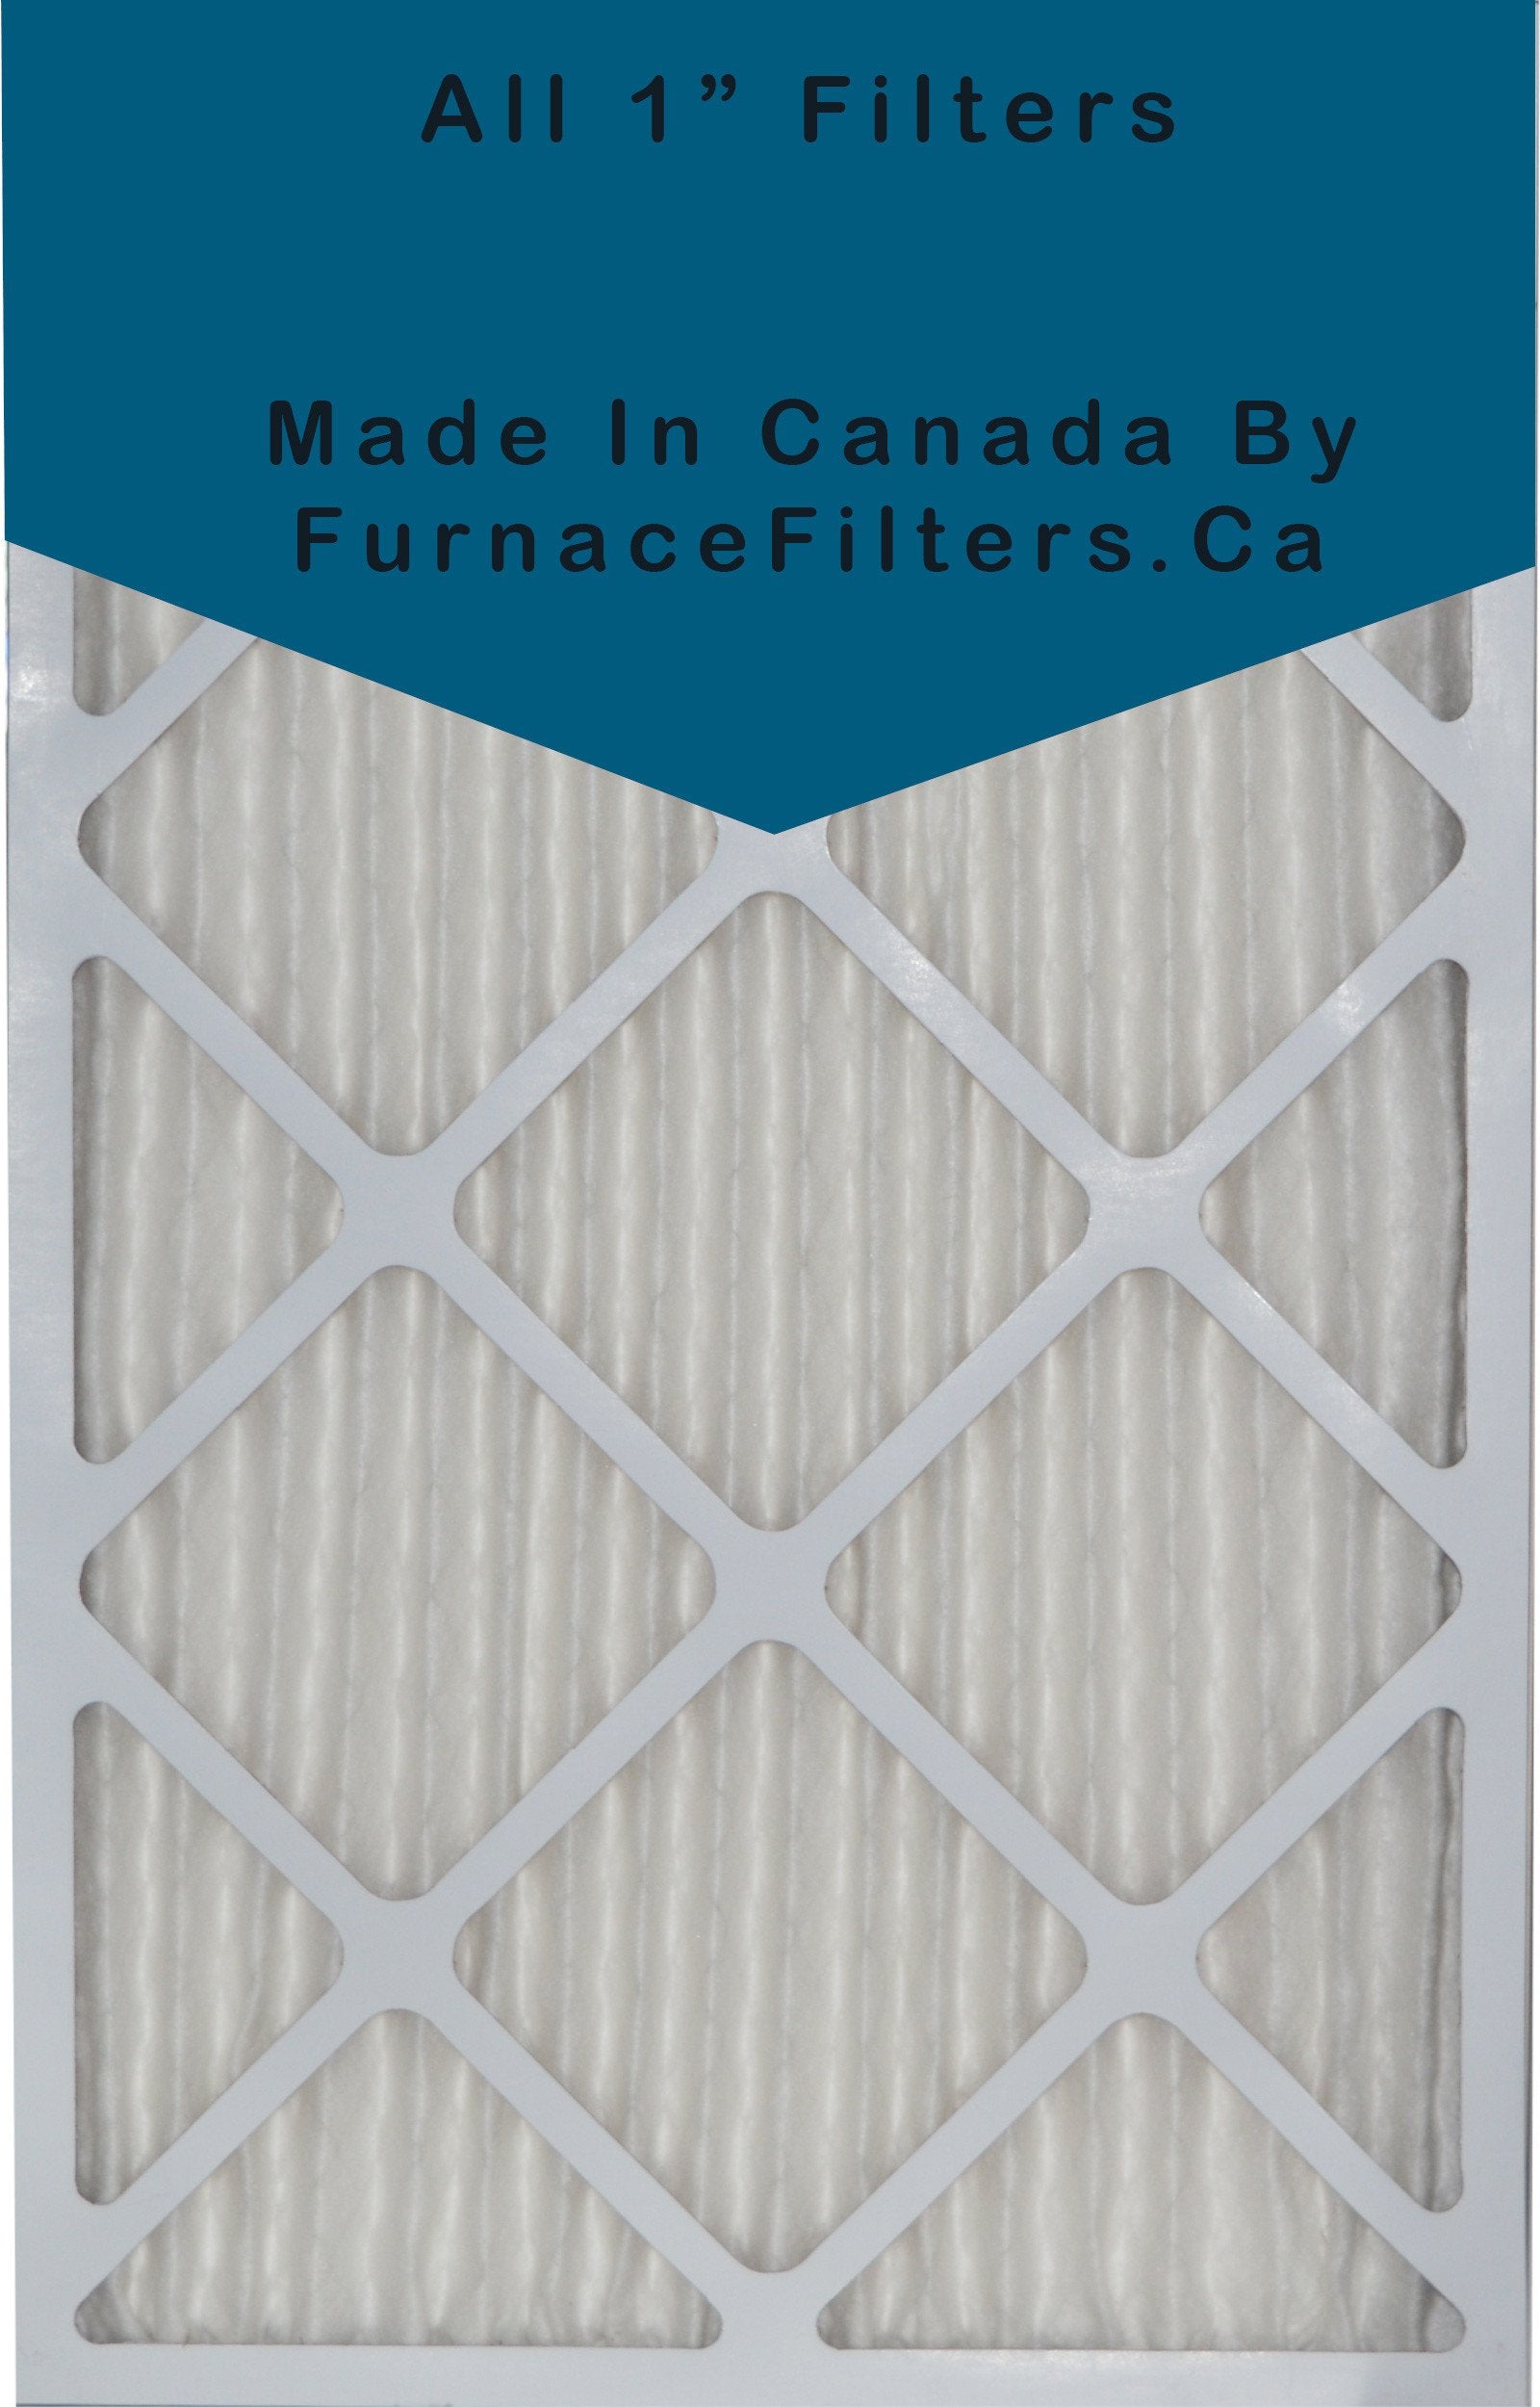 24x30x1 Furnace Filter MERV 8 Pleated Filters. Case of 6